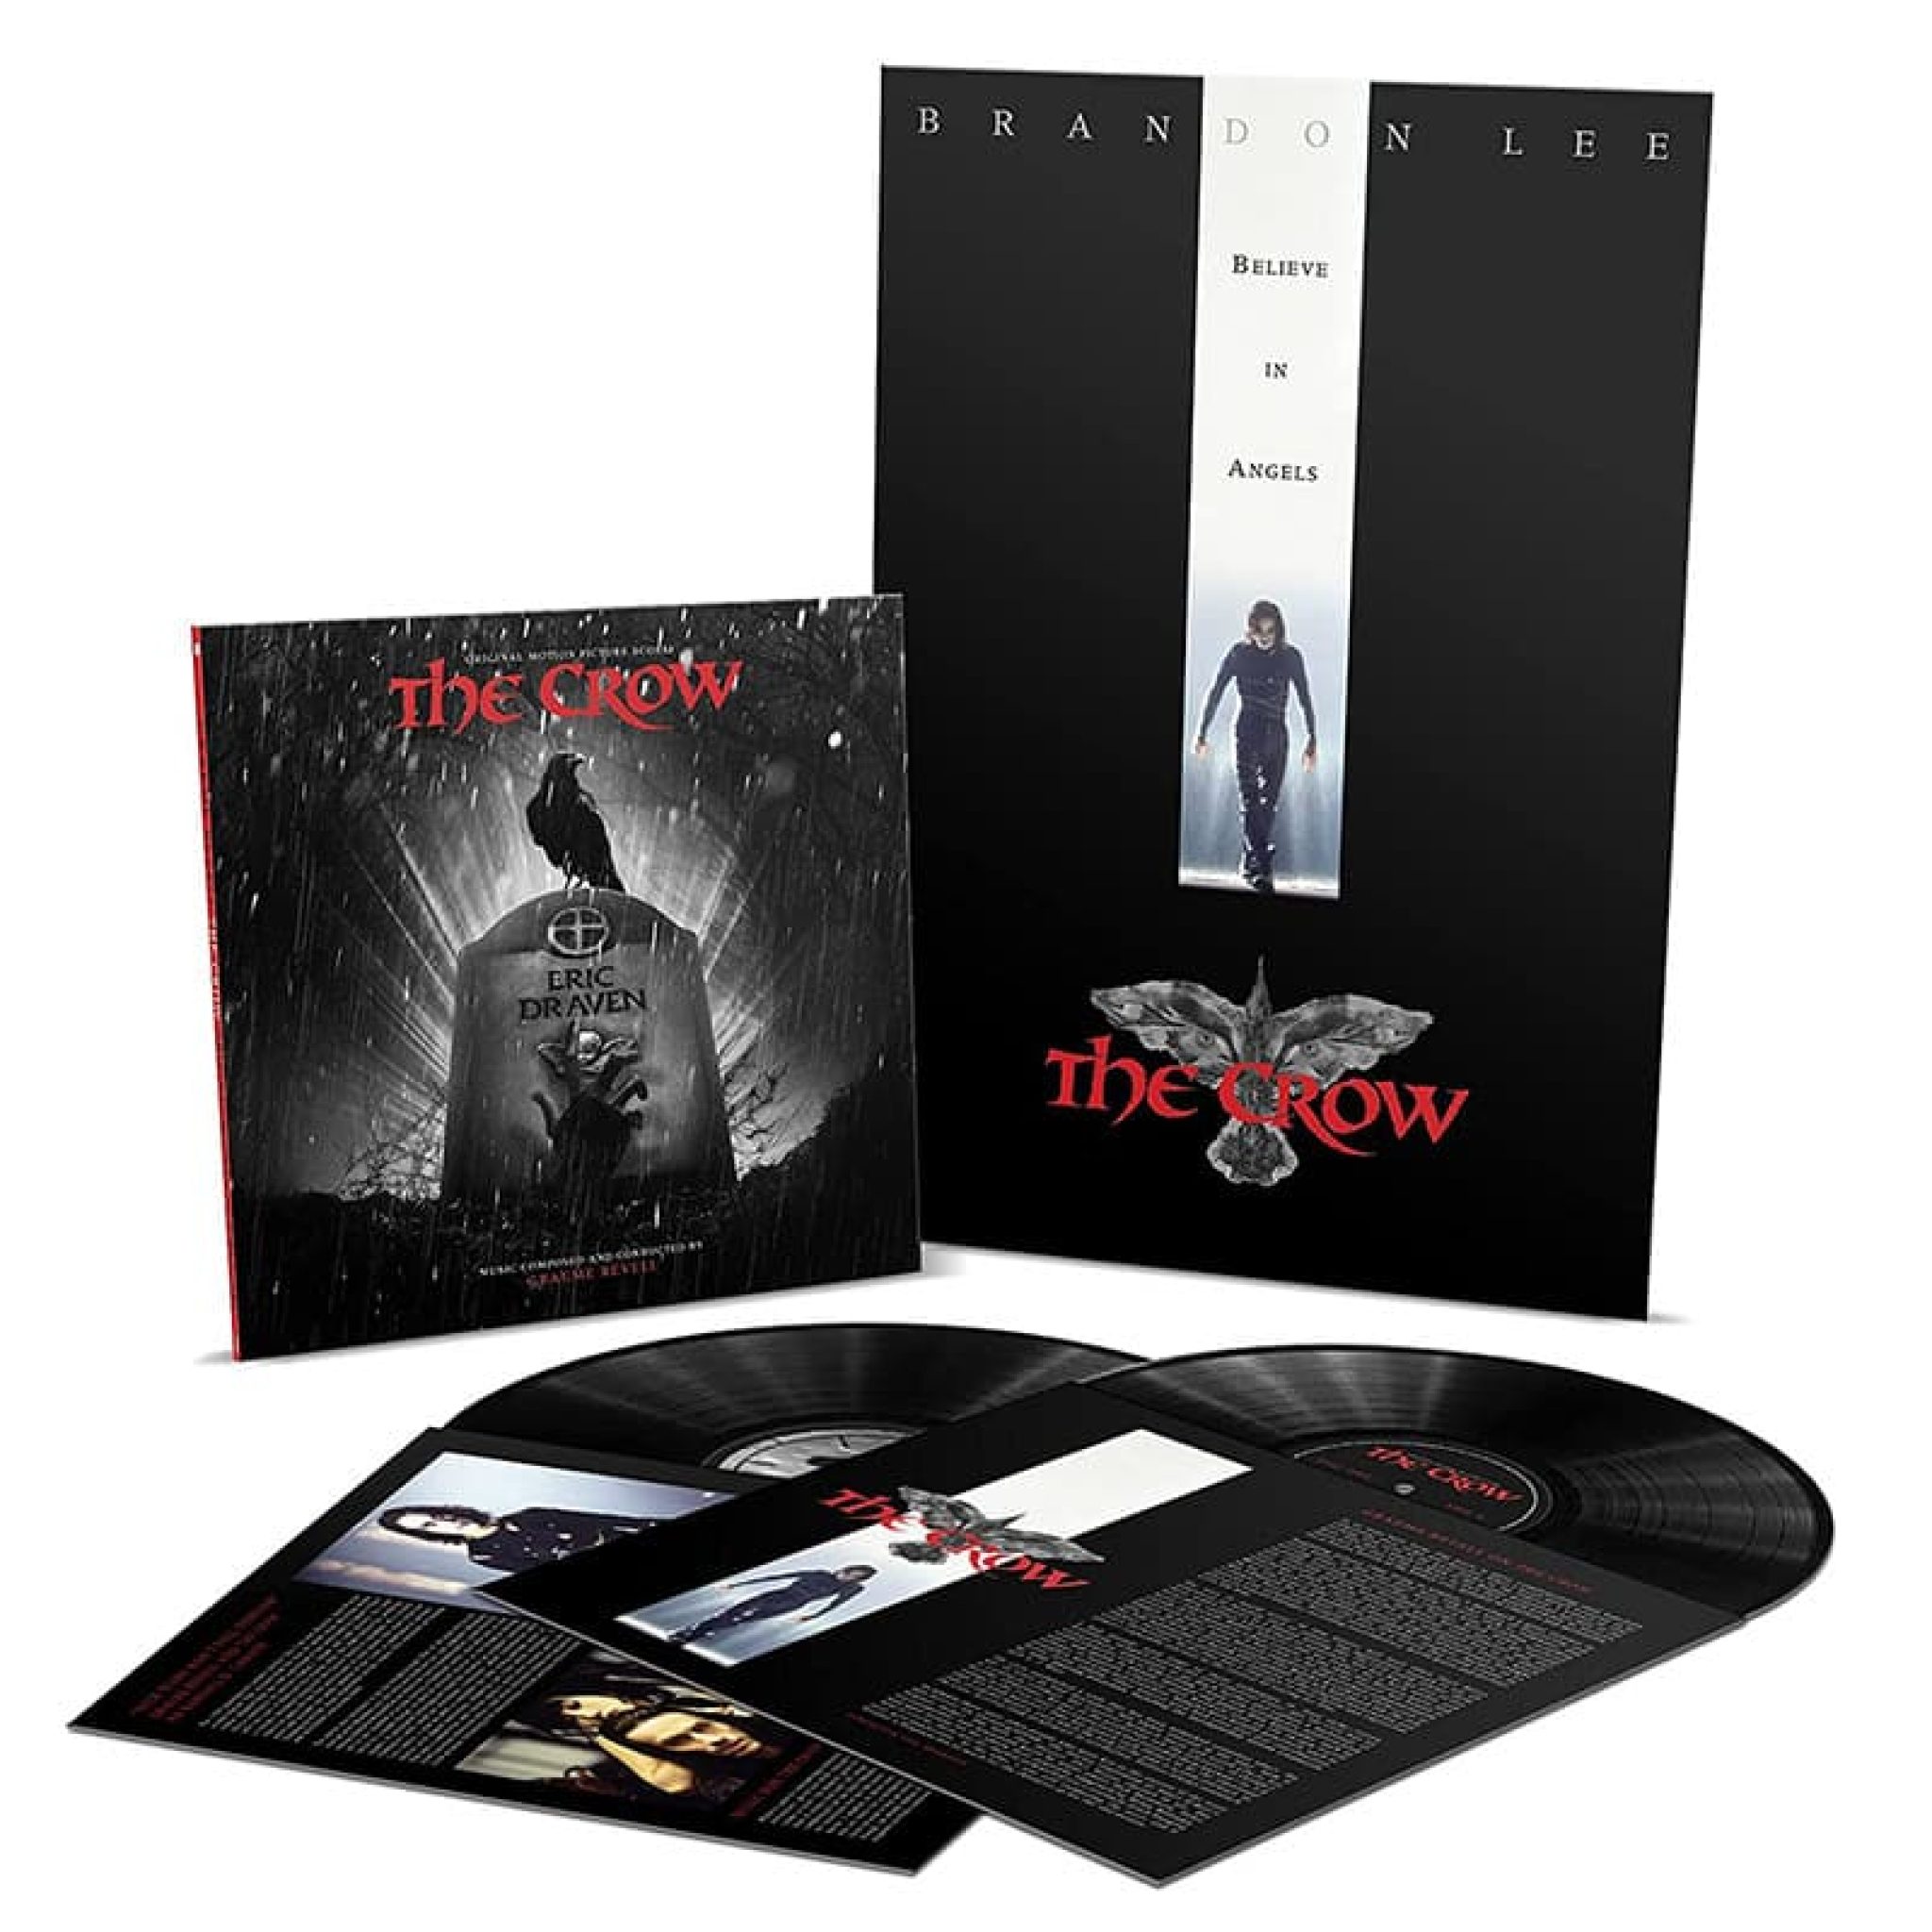 "The Crow" Original Motion Picture Score in der Limited Deluxe Edition